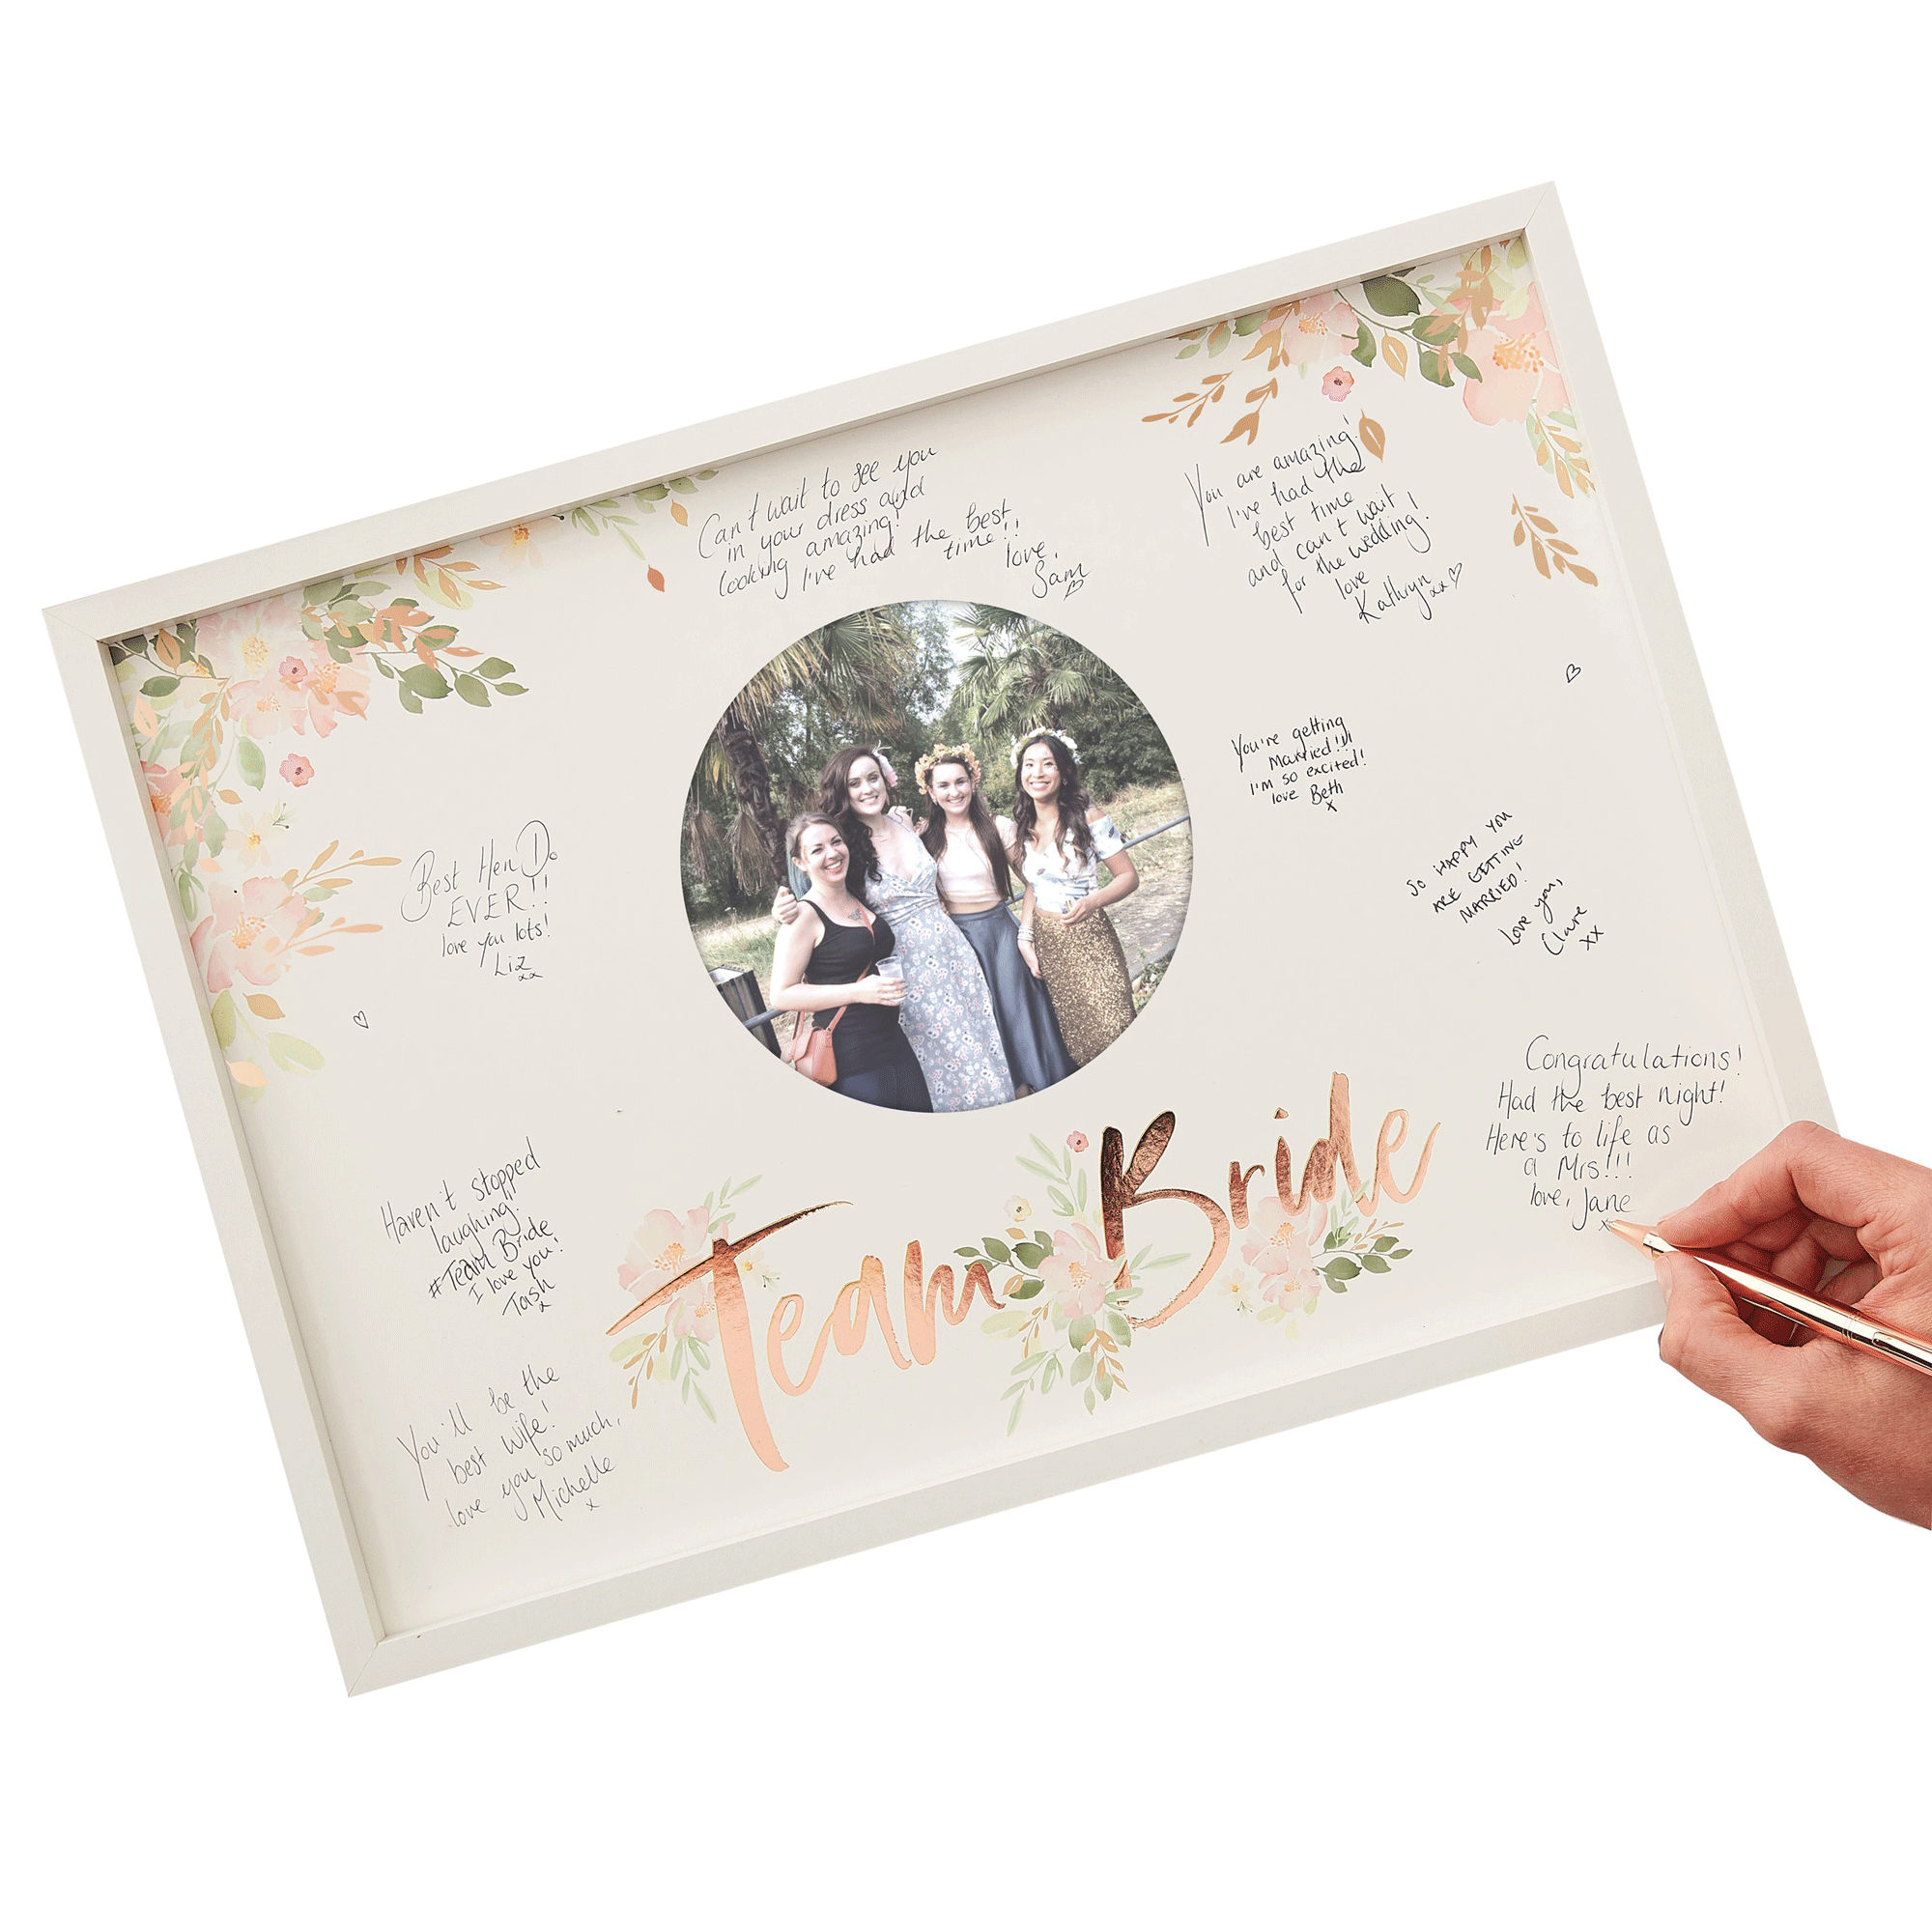 Hen Party Framed Guest Book - Floral Hen Party